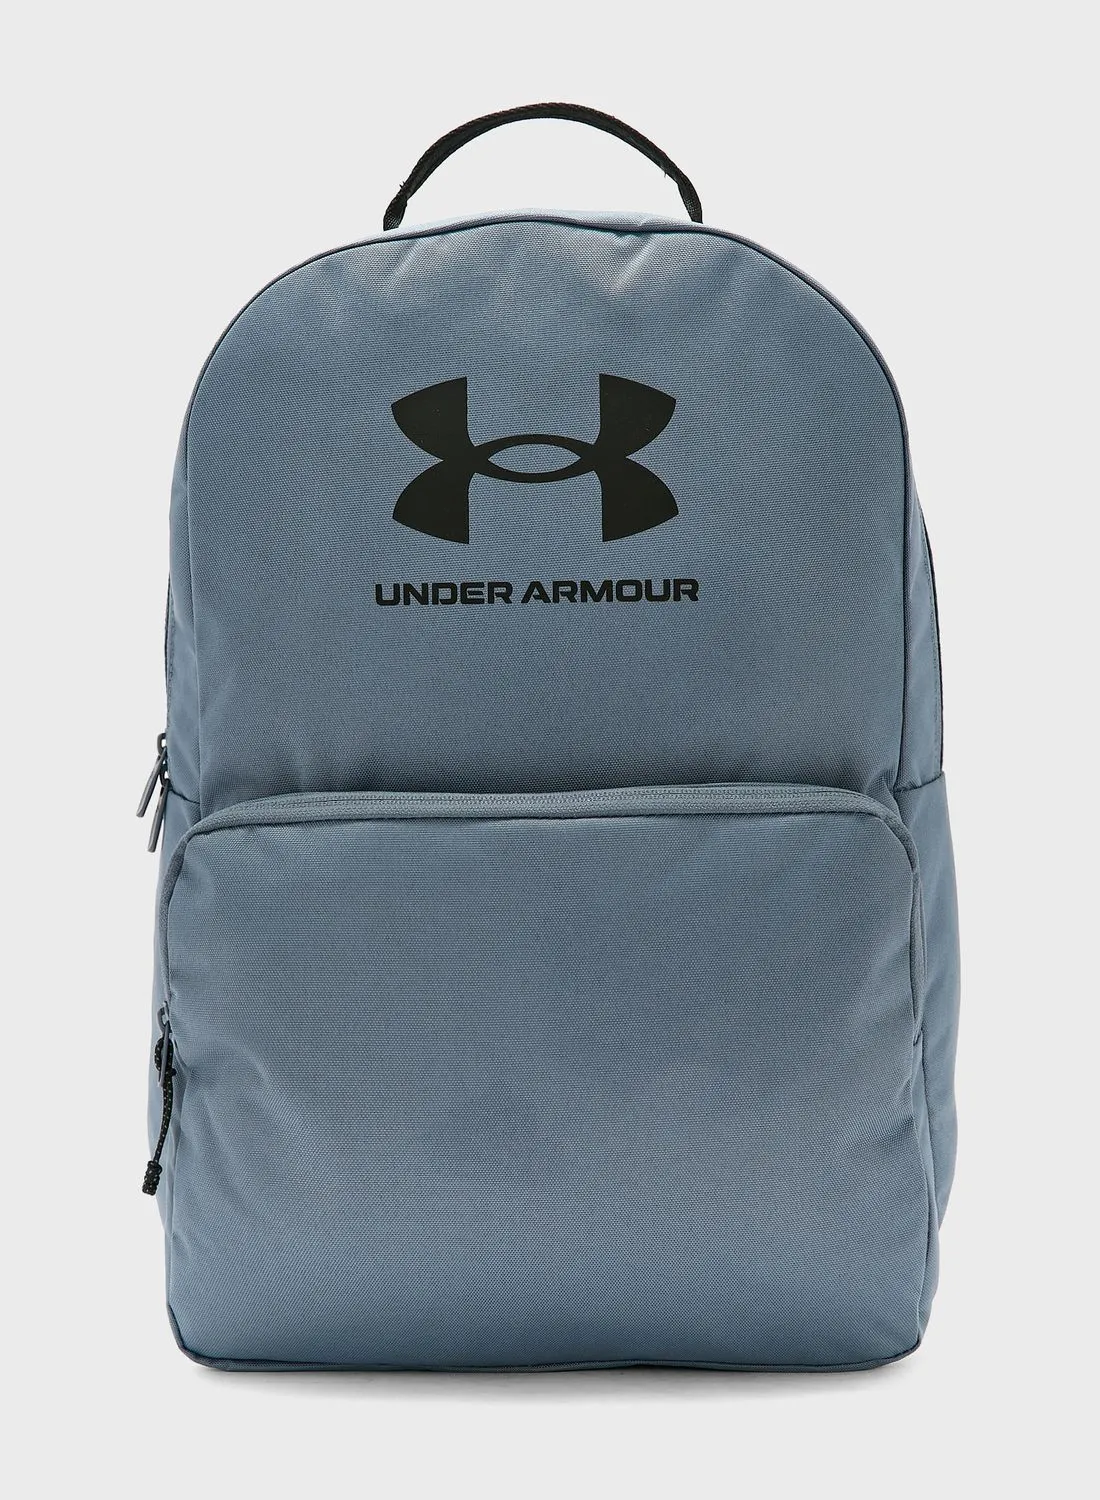 UNDER ARMOUR Loudon Unisex Backpack